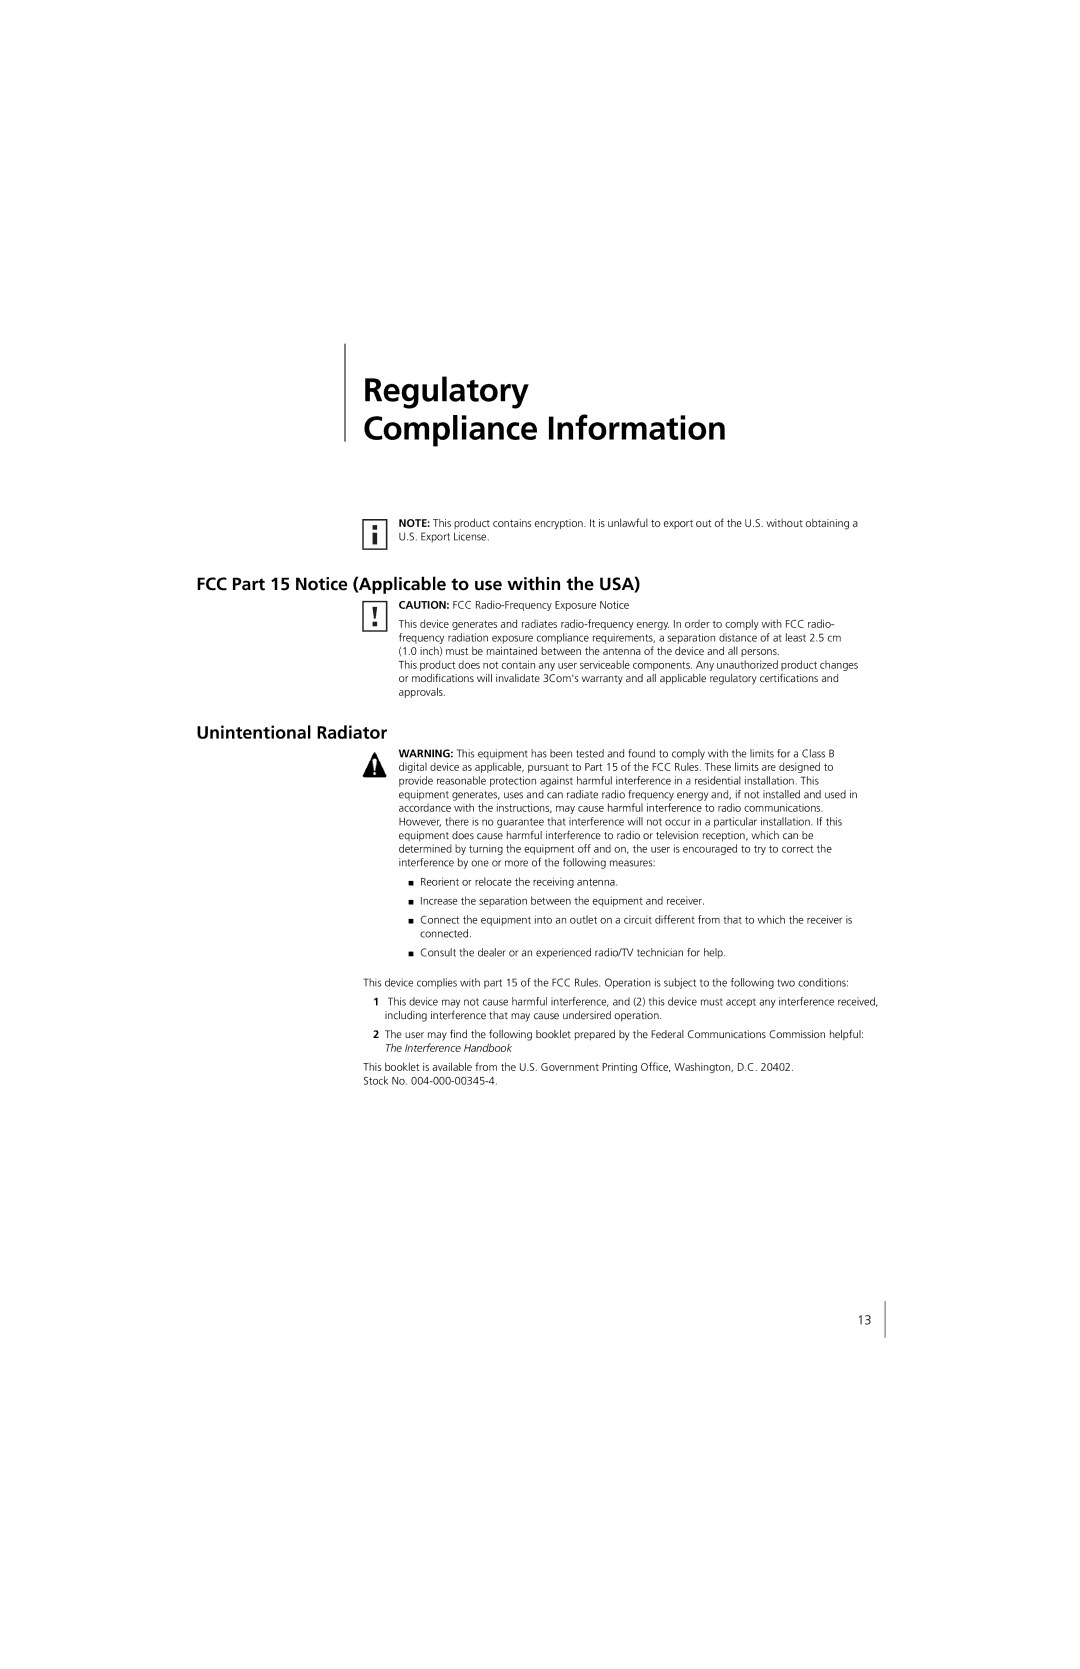 3Com 3CRPAG175 quick start Regulatory Compliance Information, FCC Part 15 Notice Applicable to use within the USA 